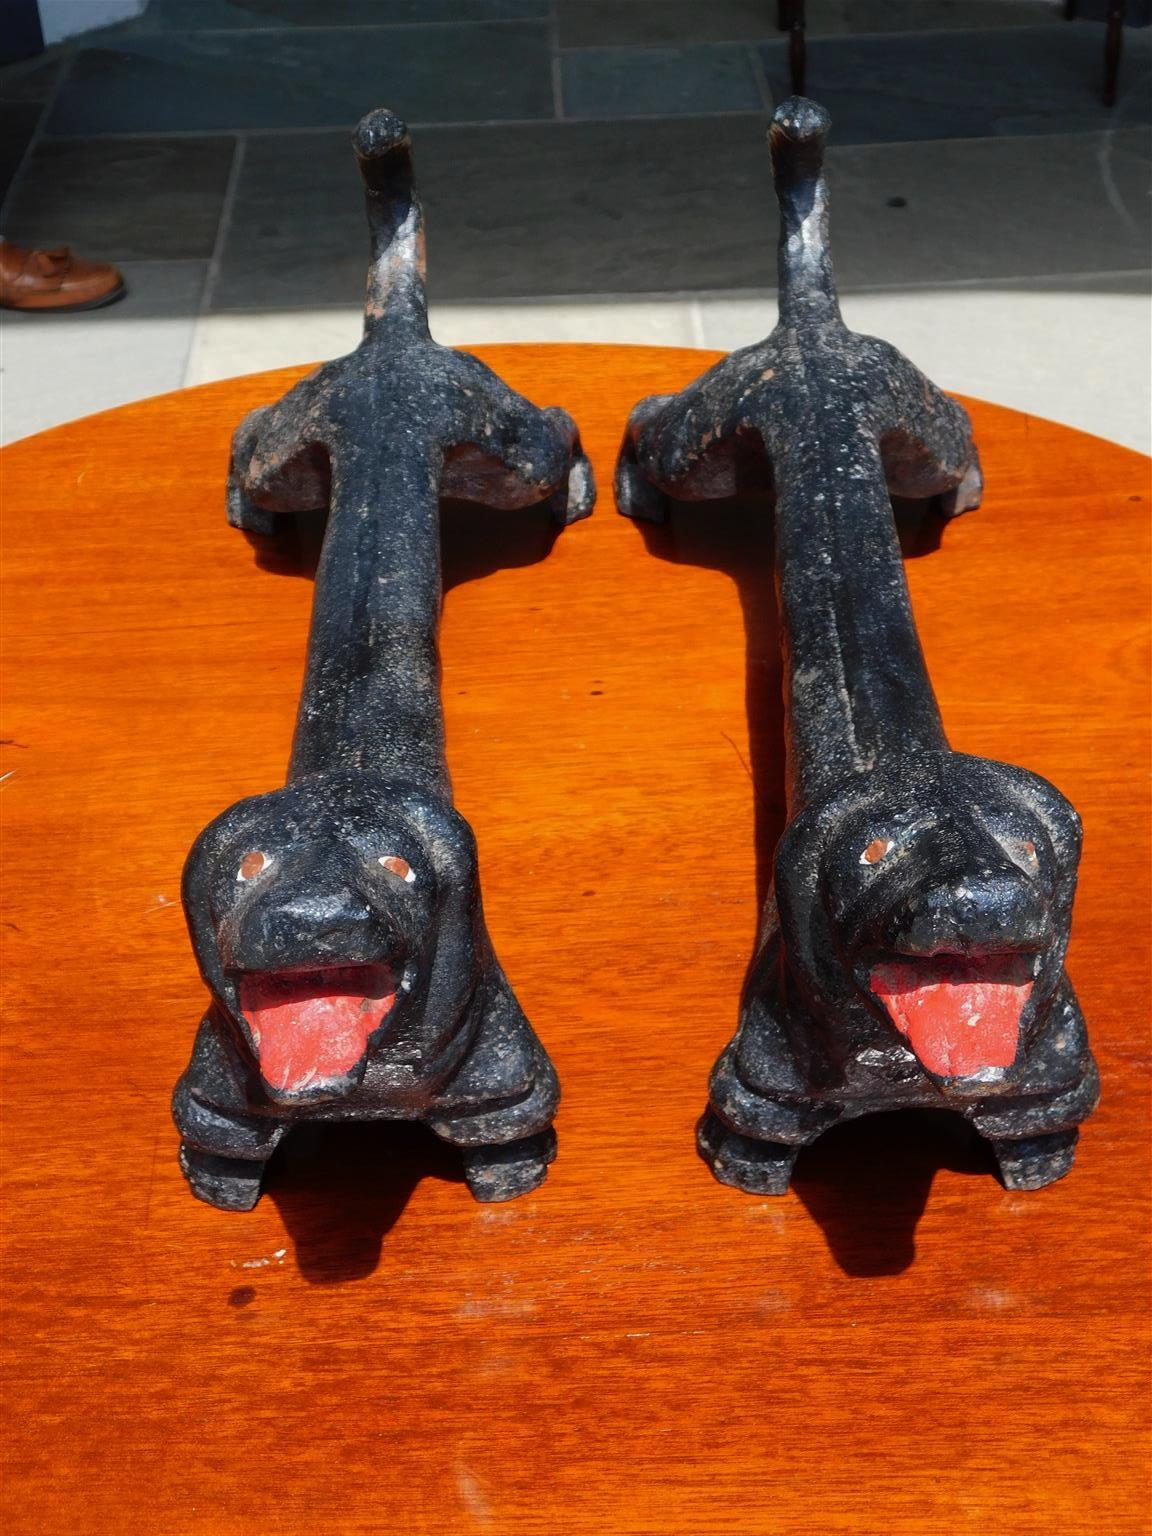 Pair of American cast iron dachshund fire place andirons with painted eyes, mouth, and curled tails. Late 19th century.